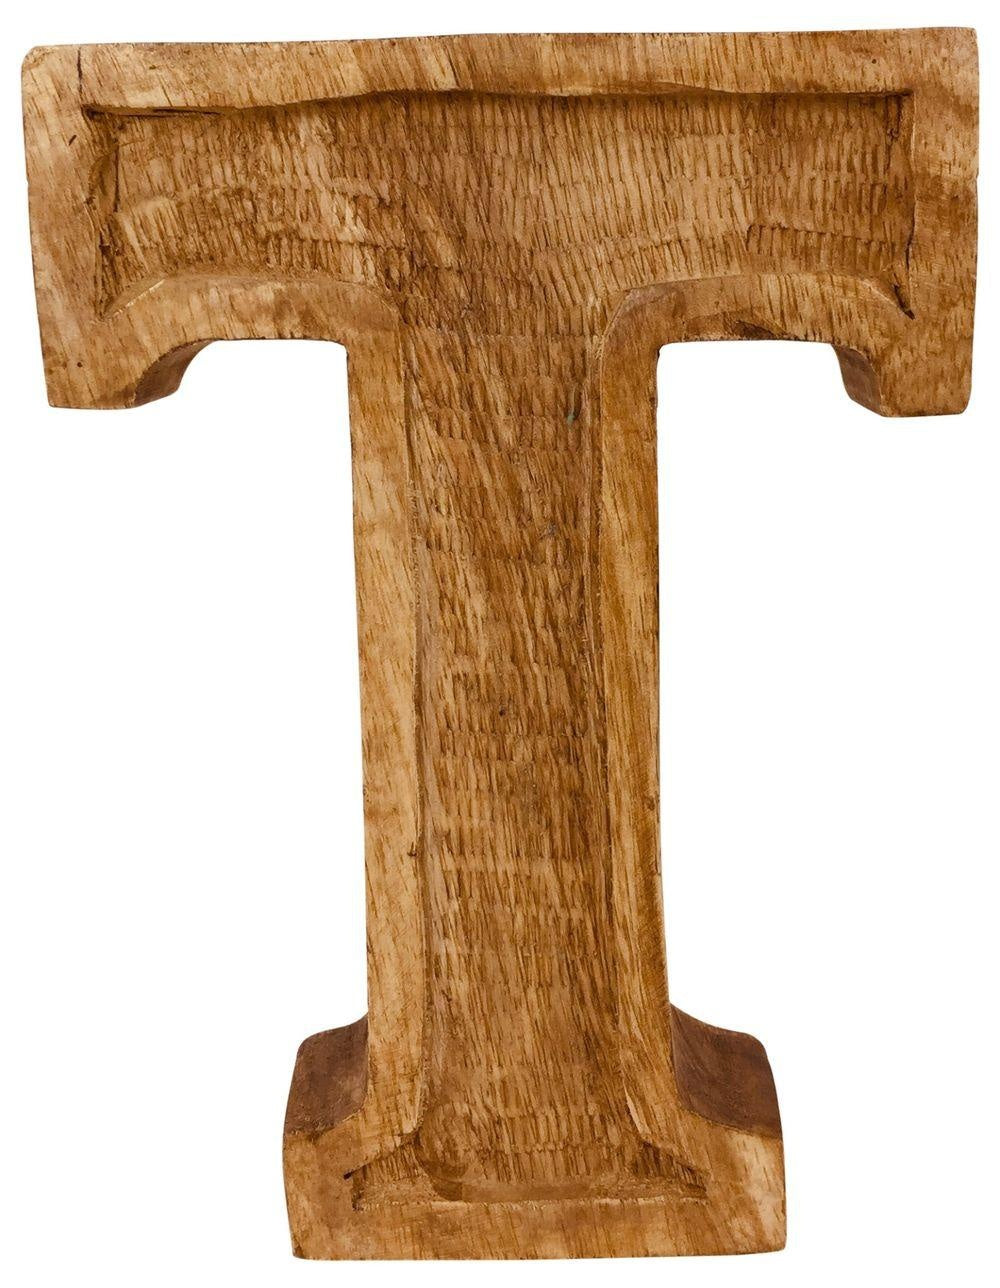 Hand Carved Wooden Embossed Letter T